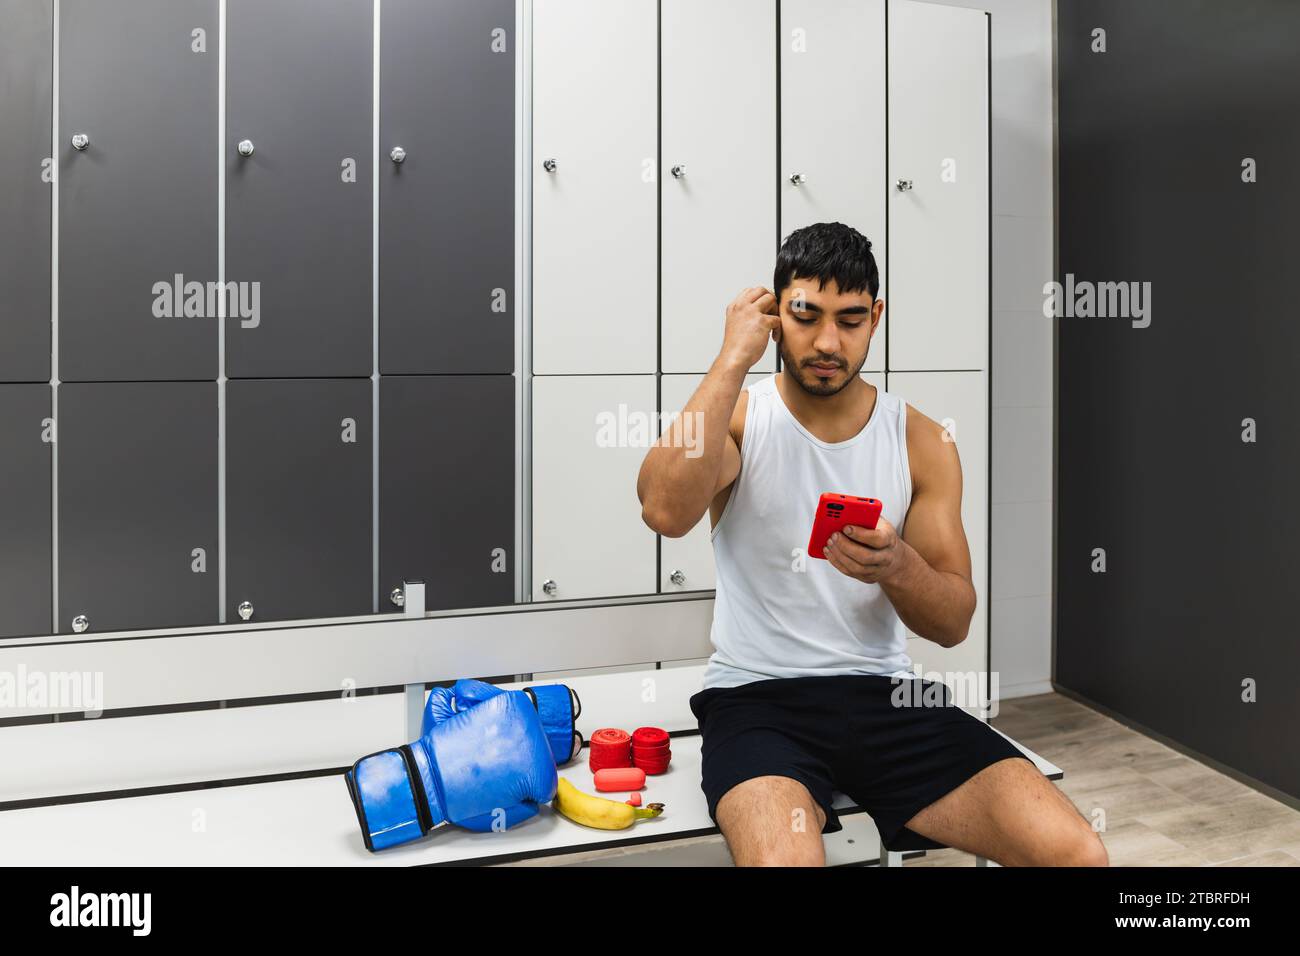 Horizontal photo man young adult mixed race sitting in the van of the boxing gym locker room with his cell phone in his hand and placing headphones in Stock Photo